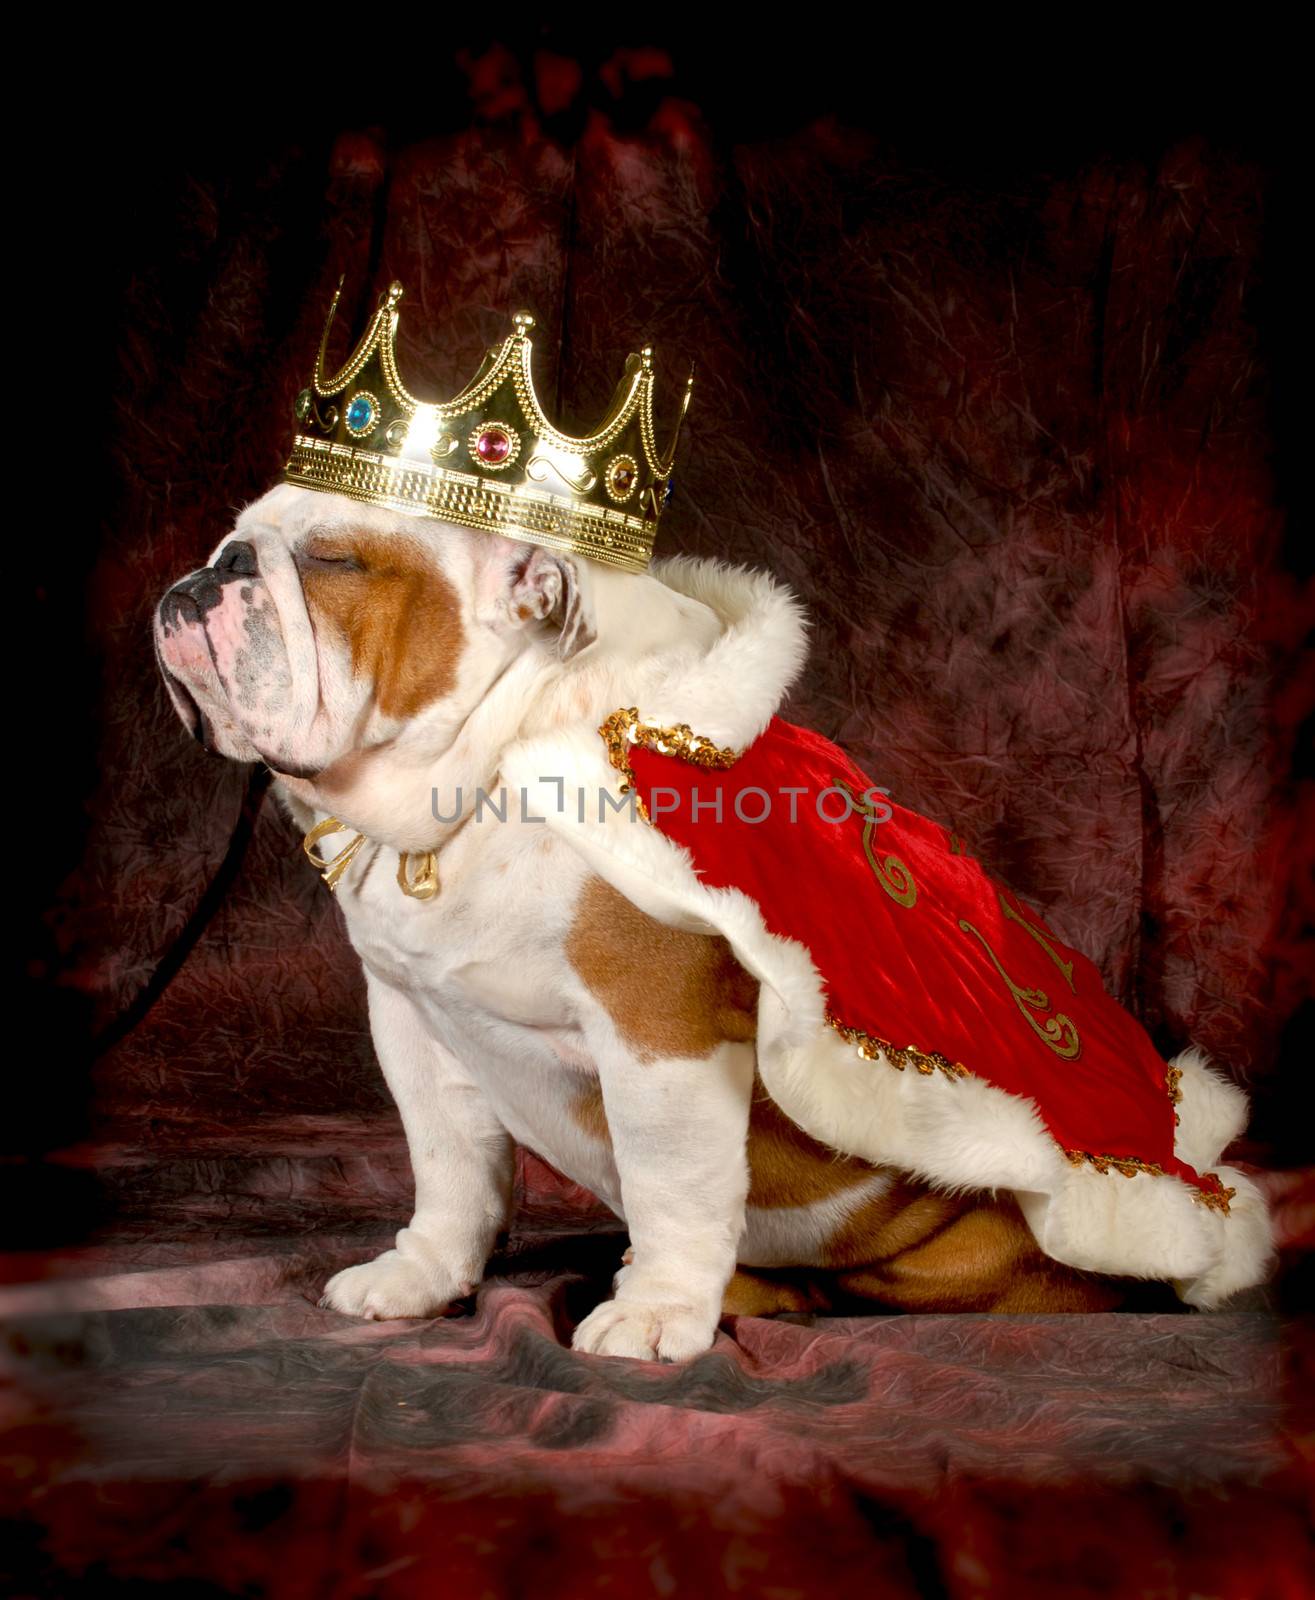 spoiled dog - english bulldog dressed up like a king - 4 year old male